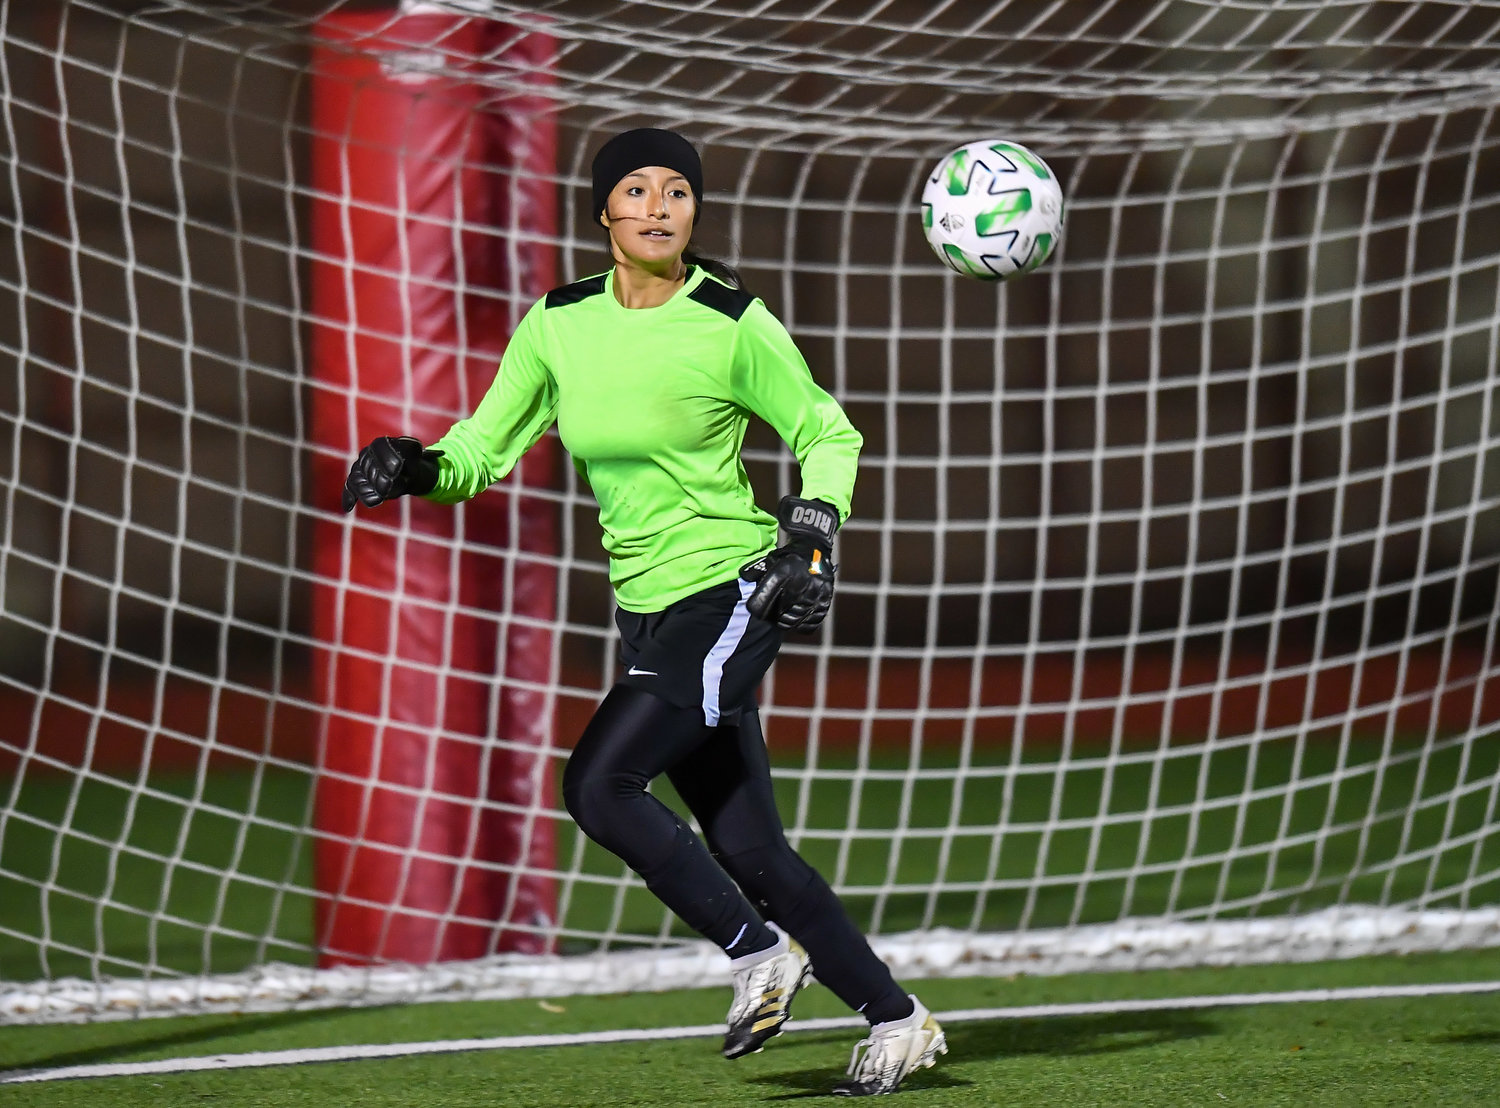 March 8, 2022: Katy's Jessica Rico #99 goal keeper goes for the ball during the Katy vs Katy Taylor soccer match at KHS. (Photo by Mark Goodman / Katy Times)